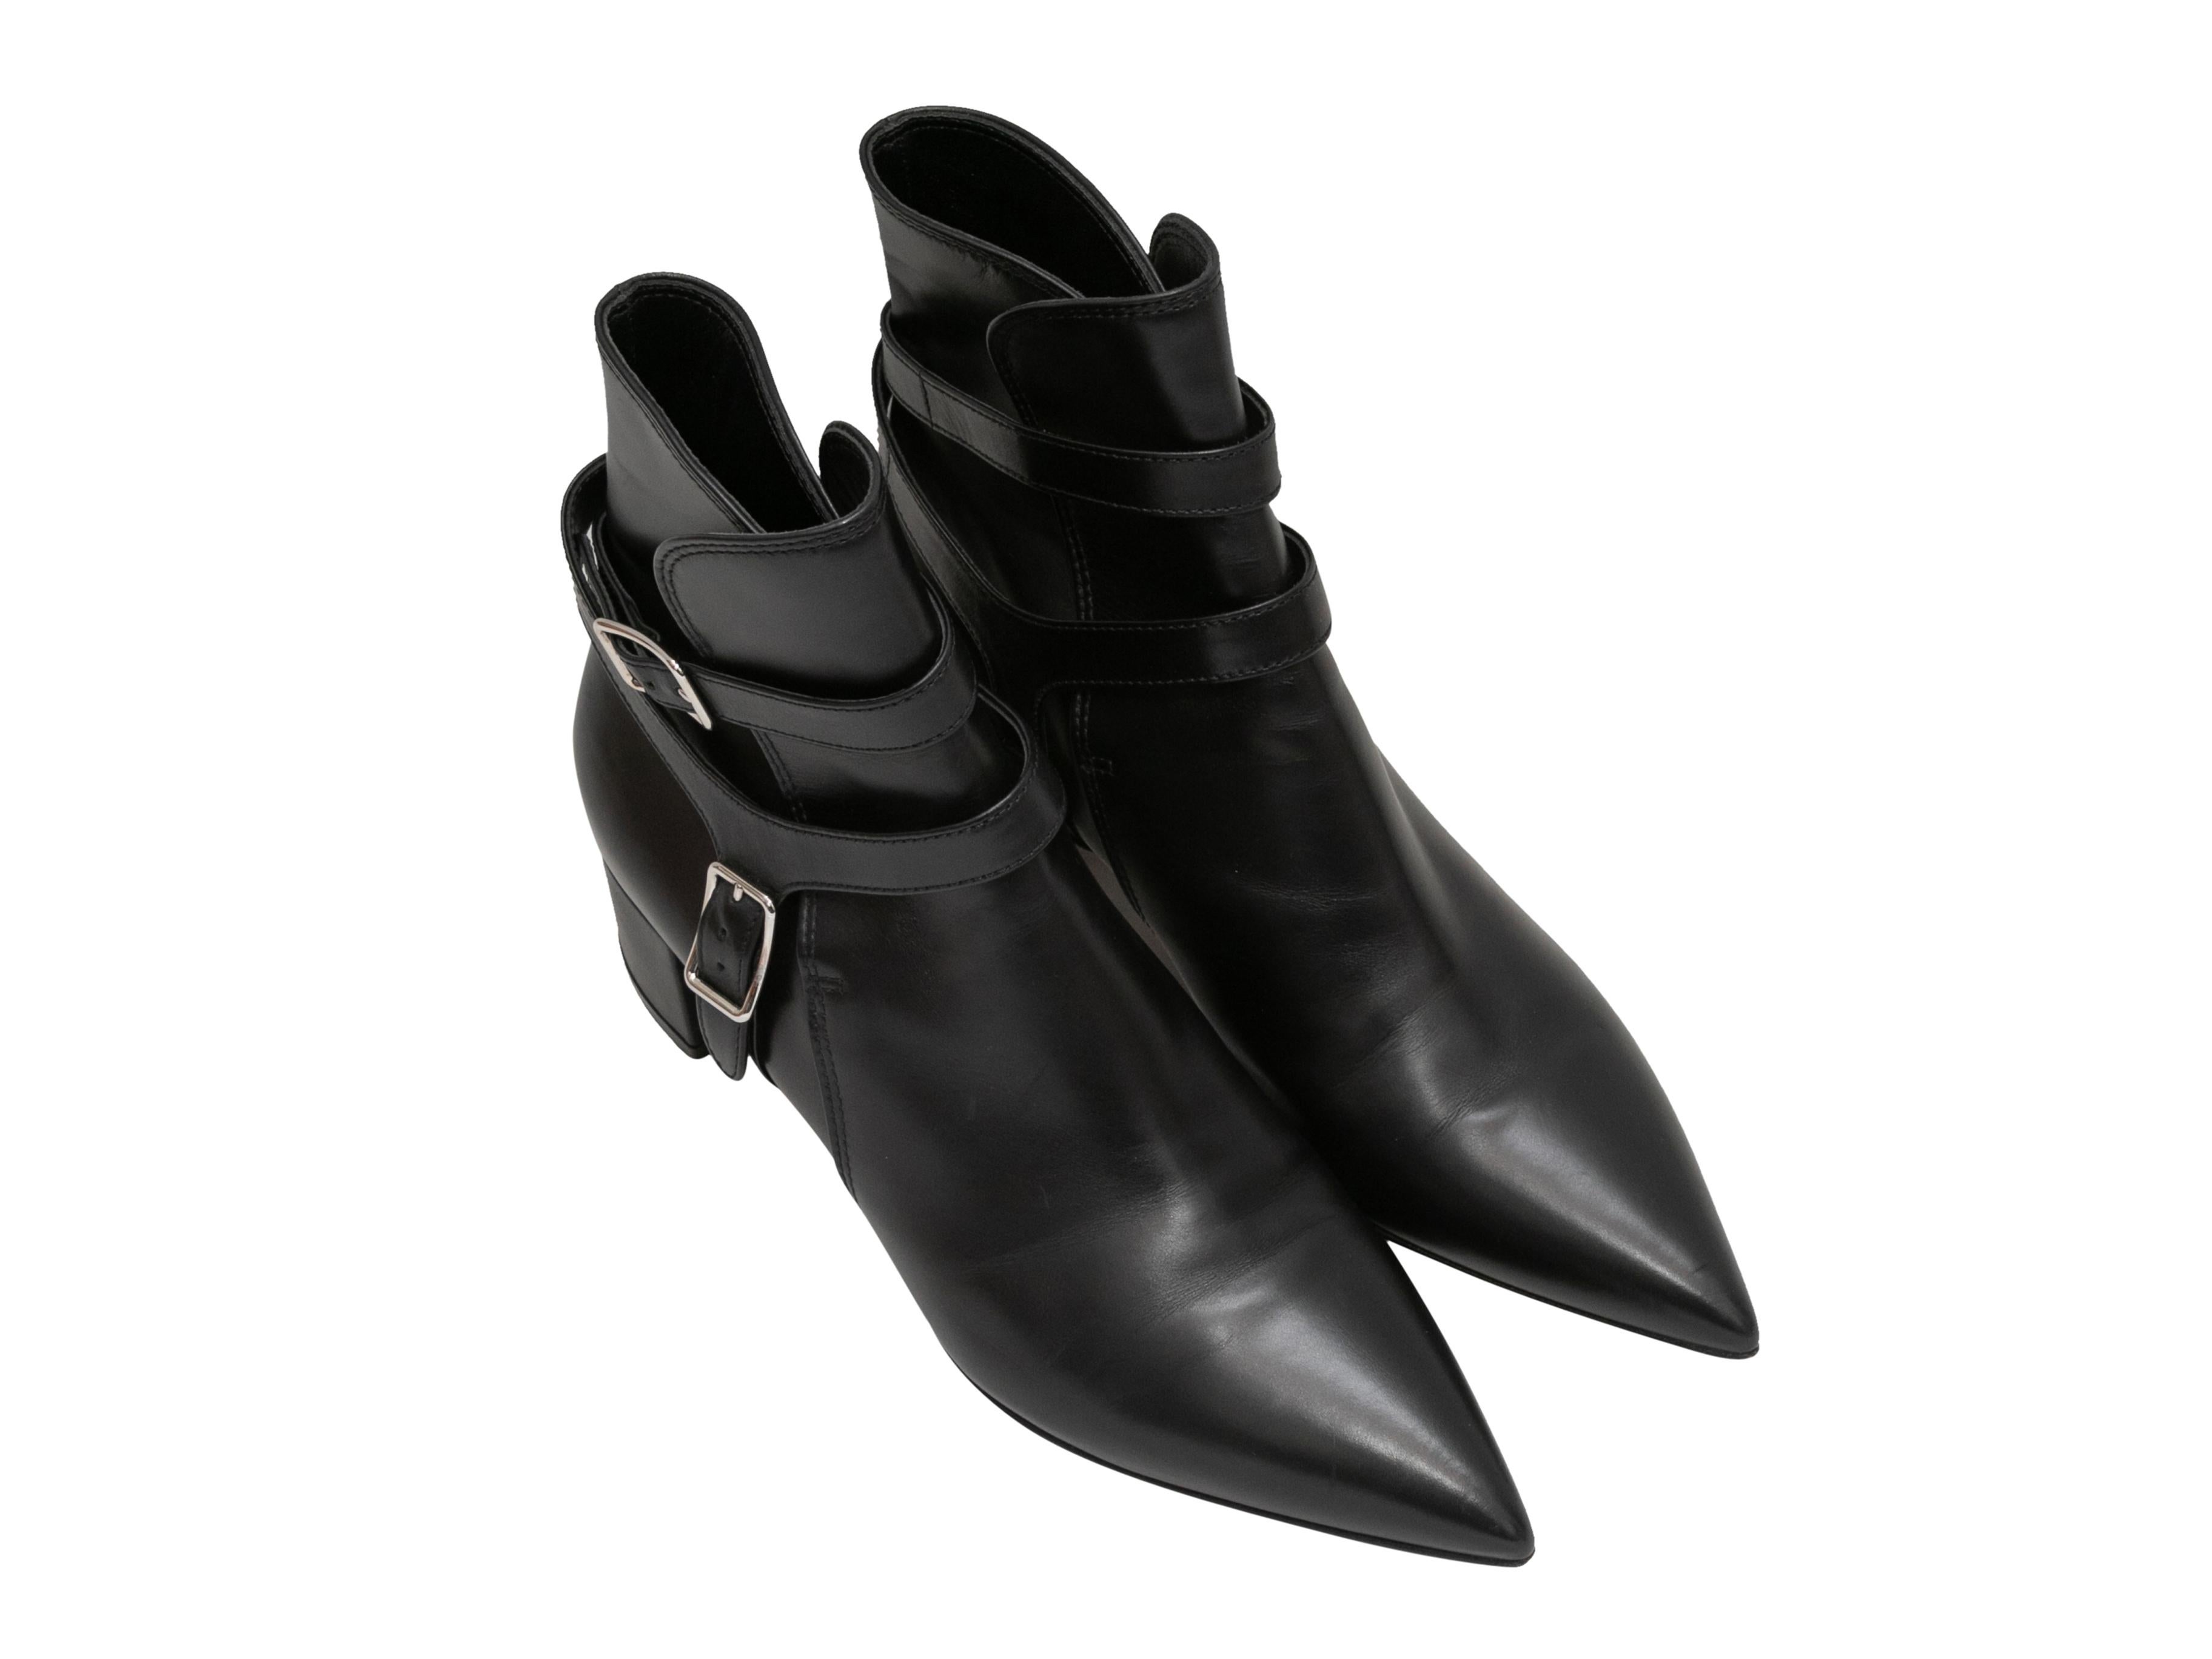 Black leather pointed-toe ankle boots by Gianvito Rossi. Block heels. Buckle accents at shafts. 5